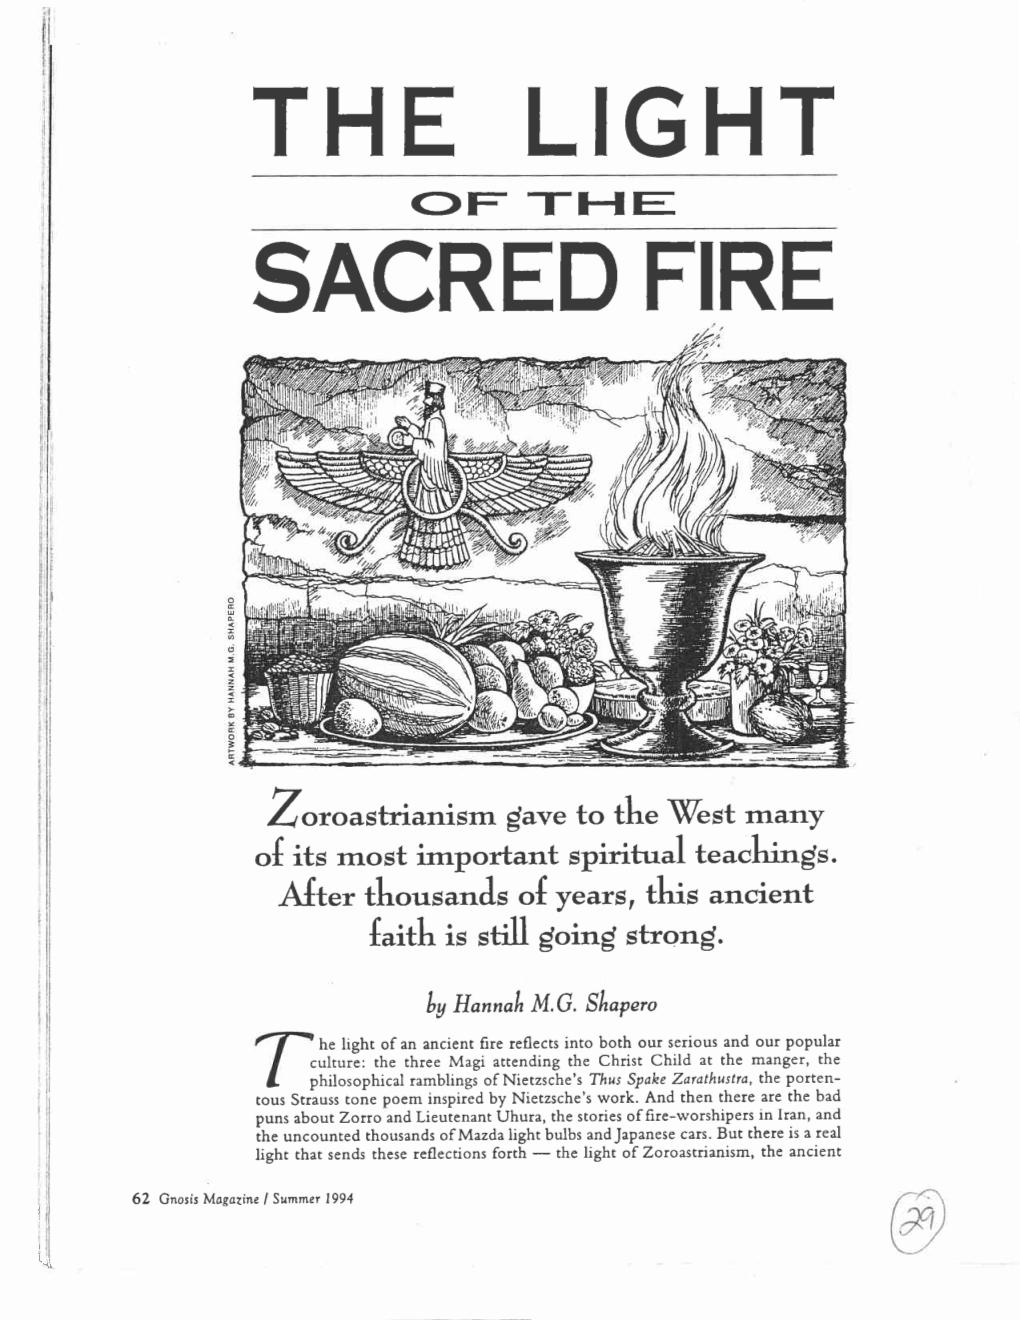 The Light of the Sacred Fire